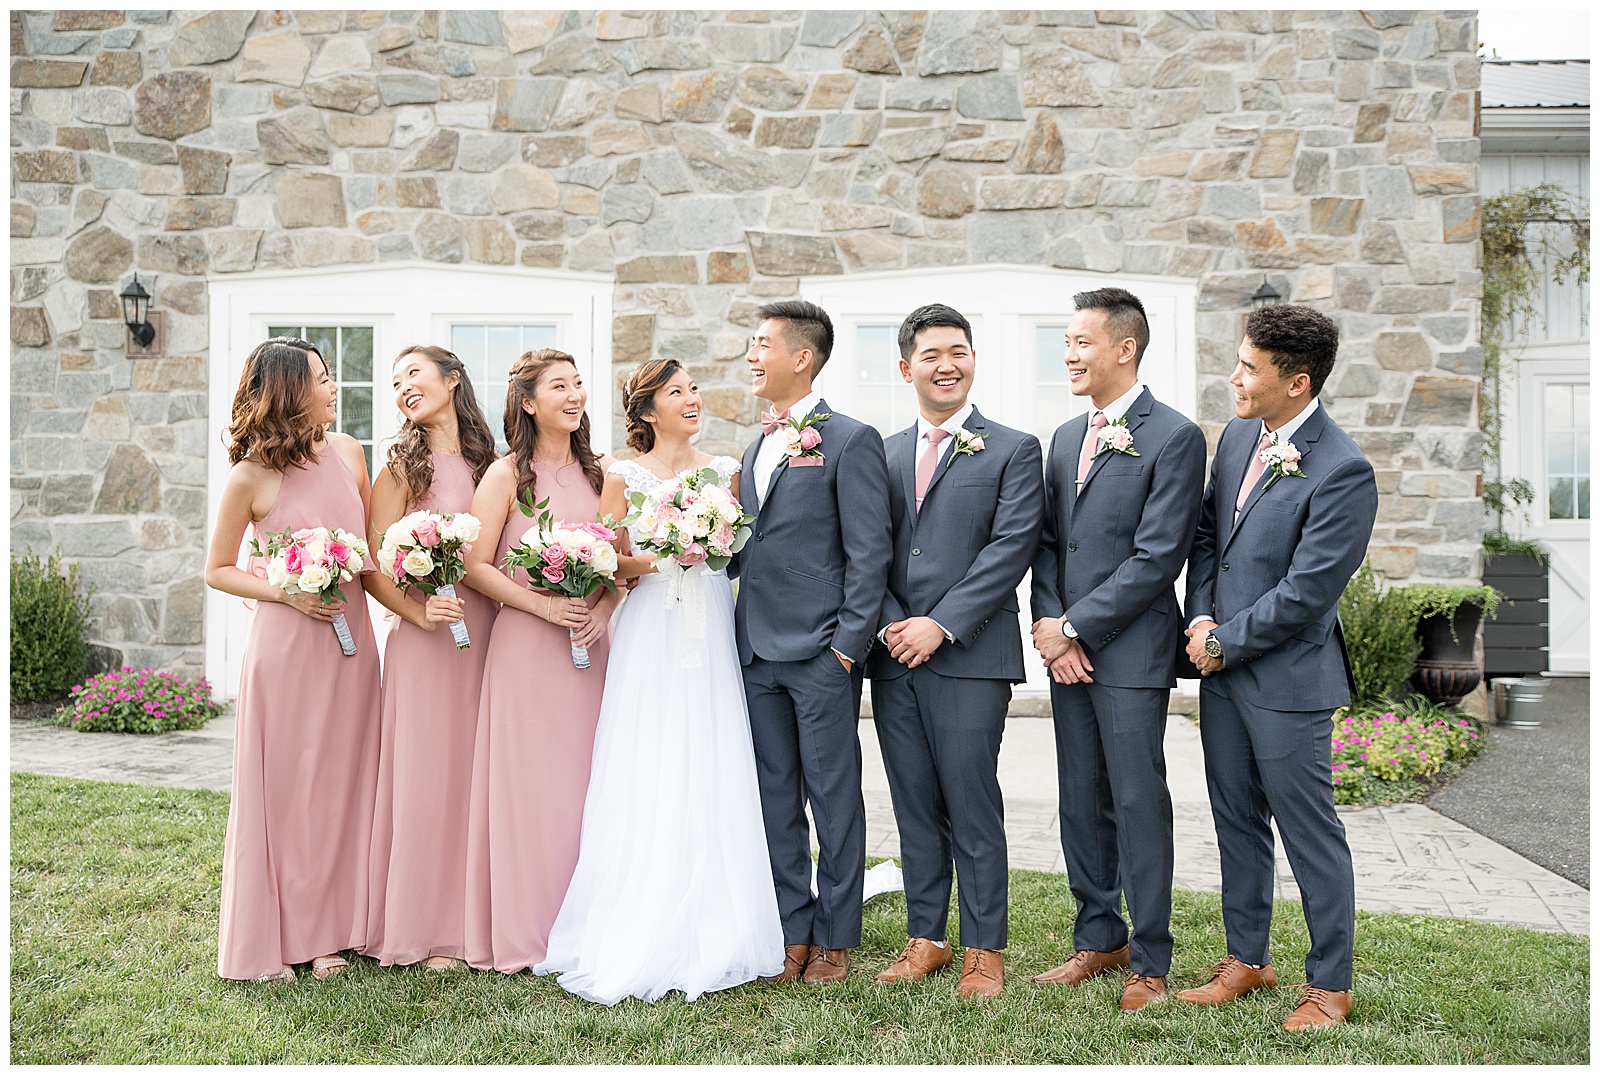 full bridal party shot with pink dresses and blue suits